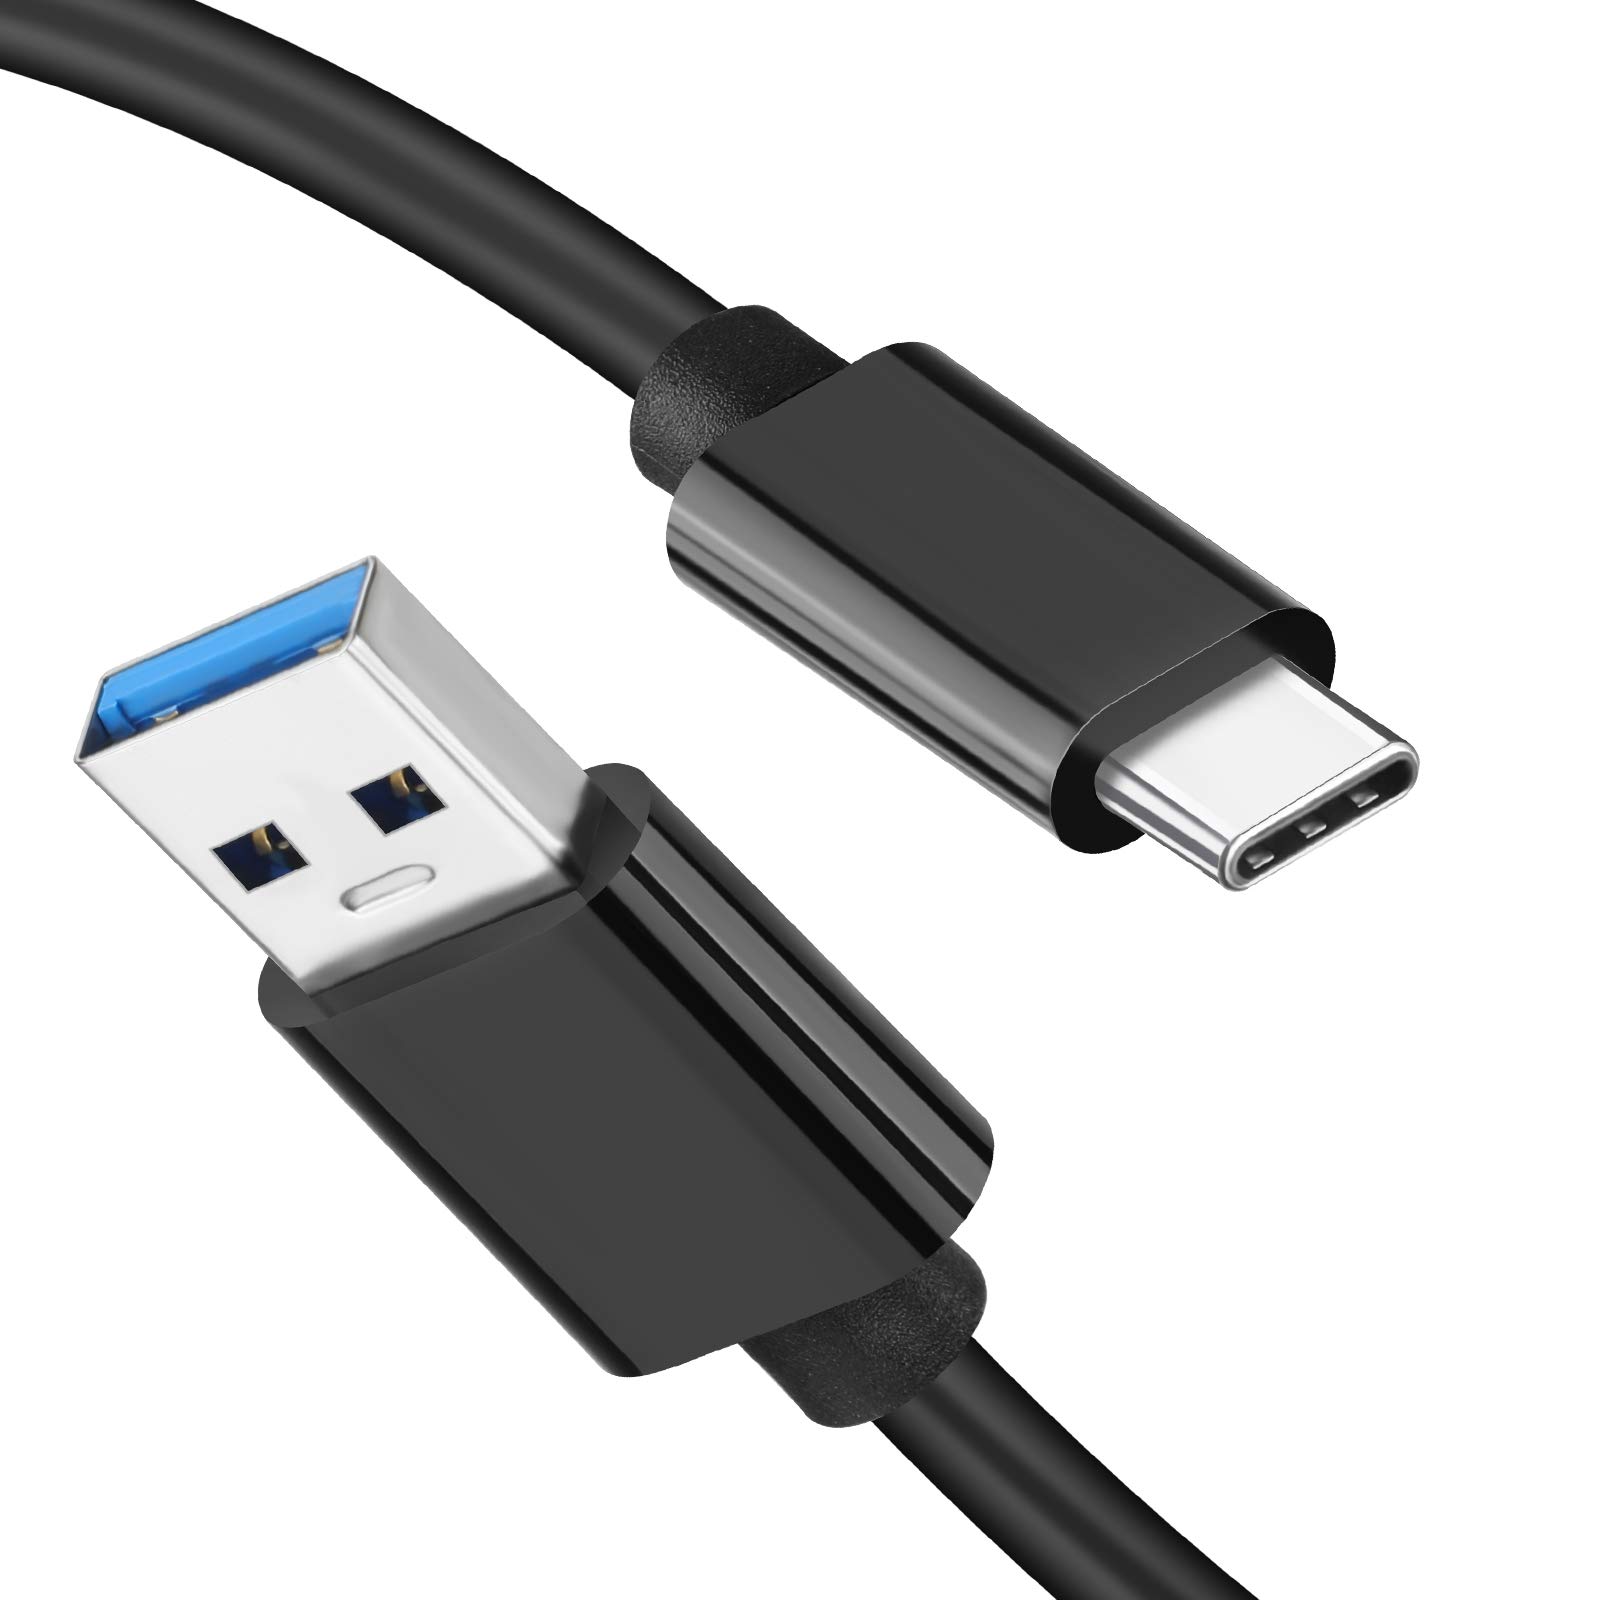 USB cable reconnecting